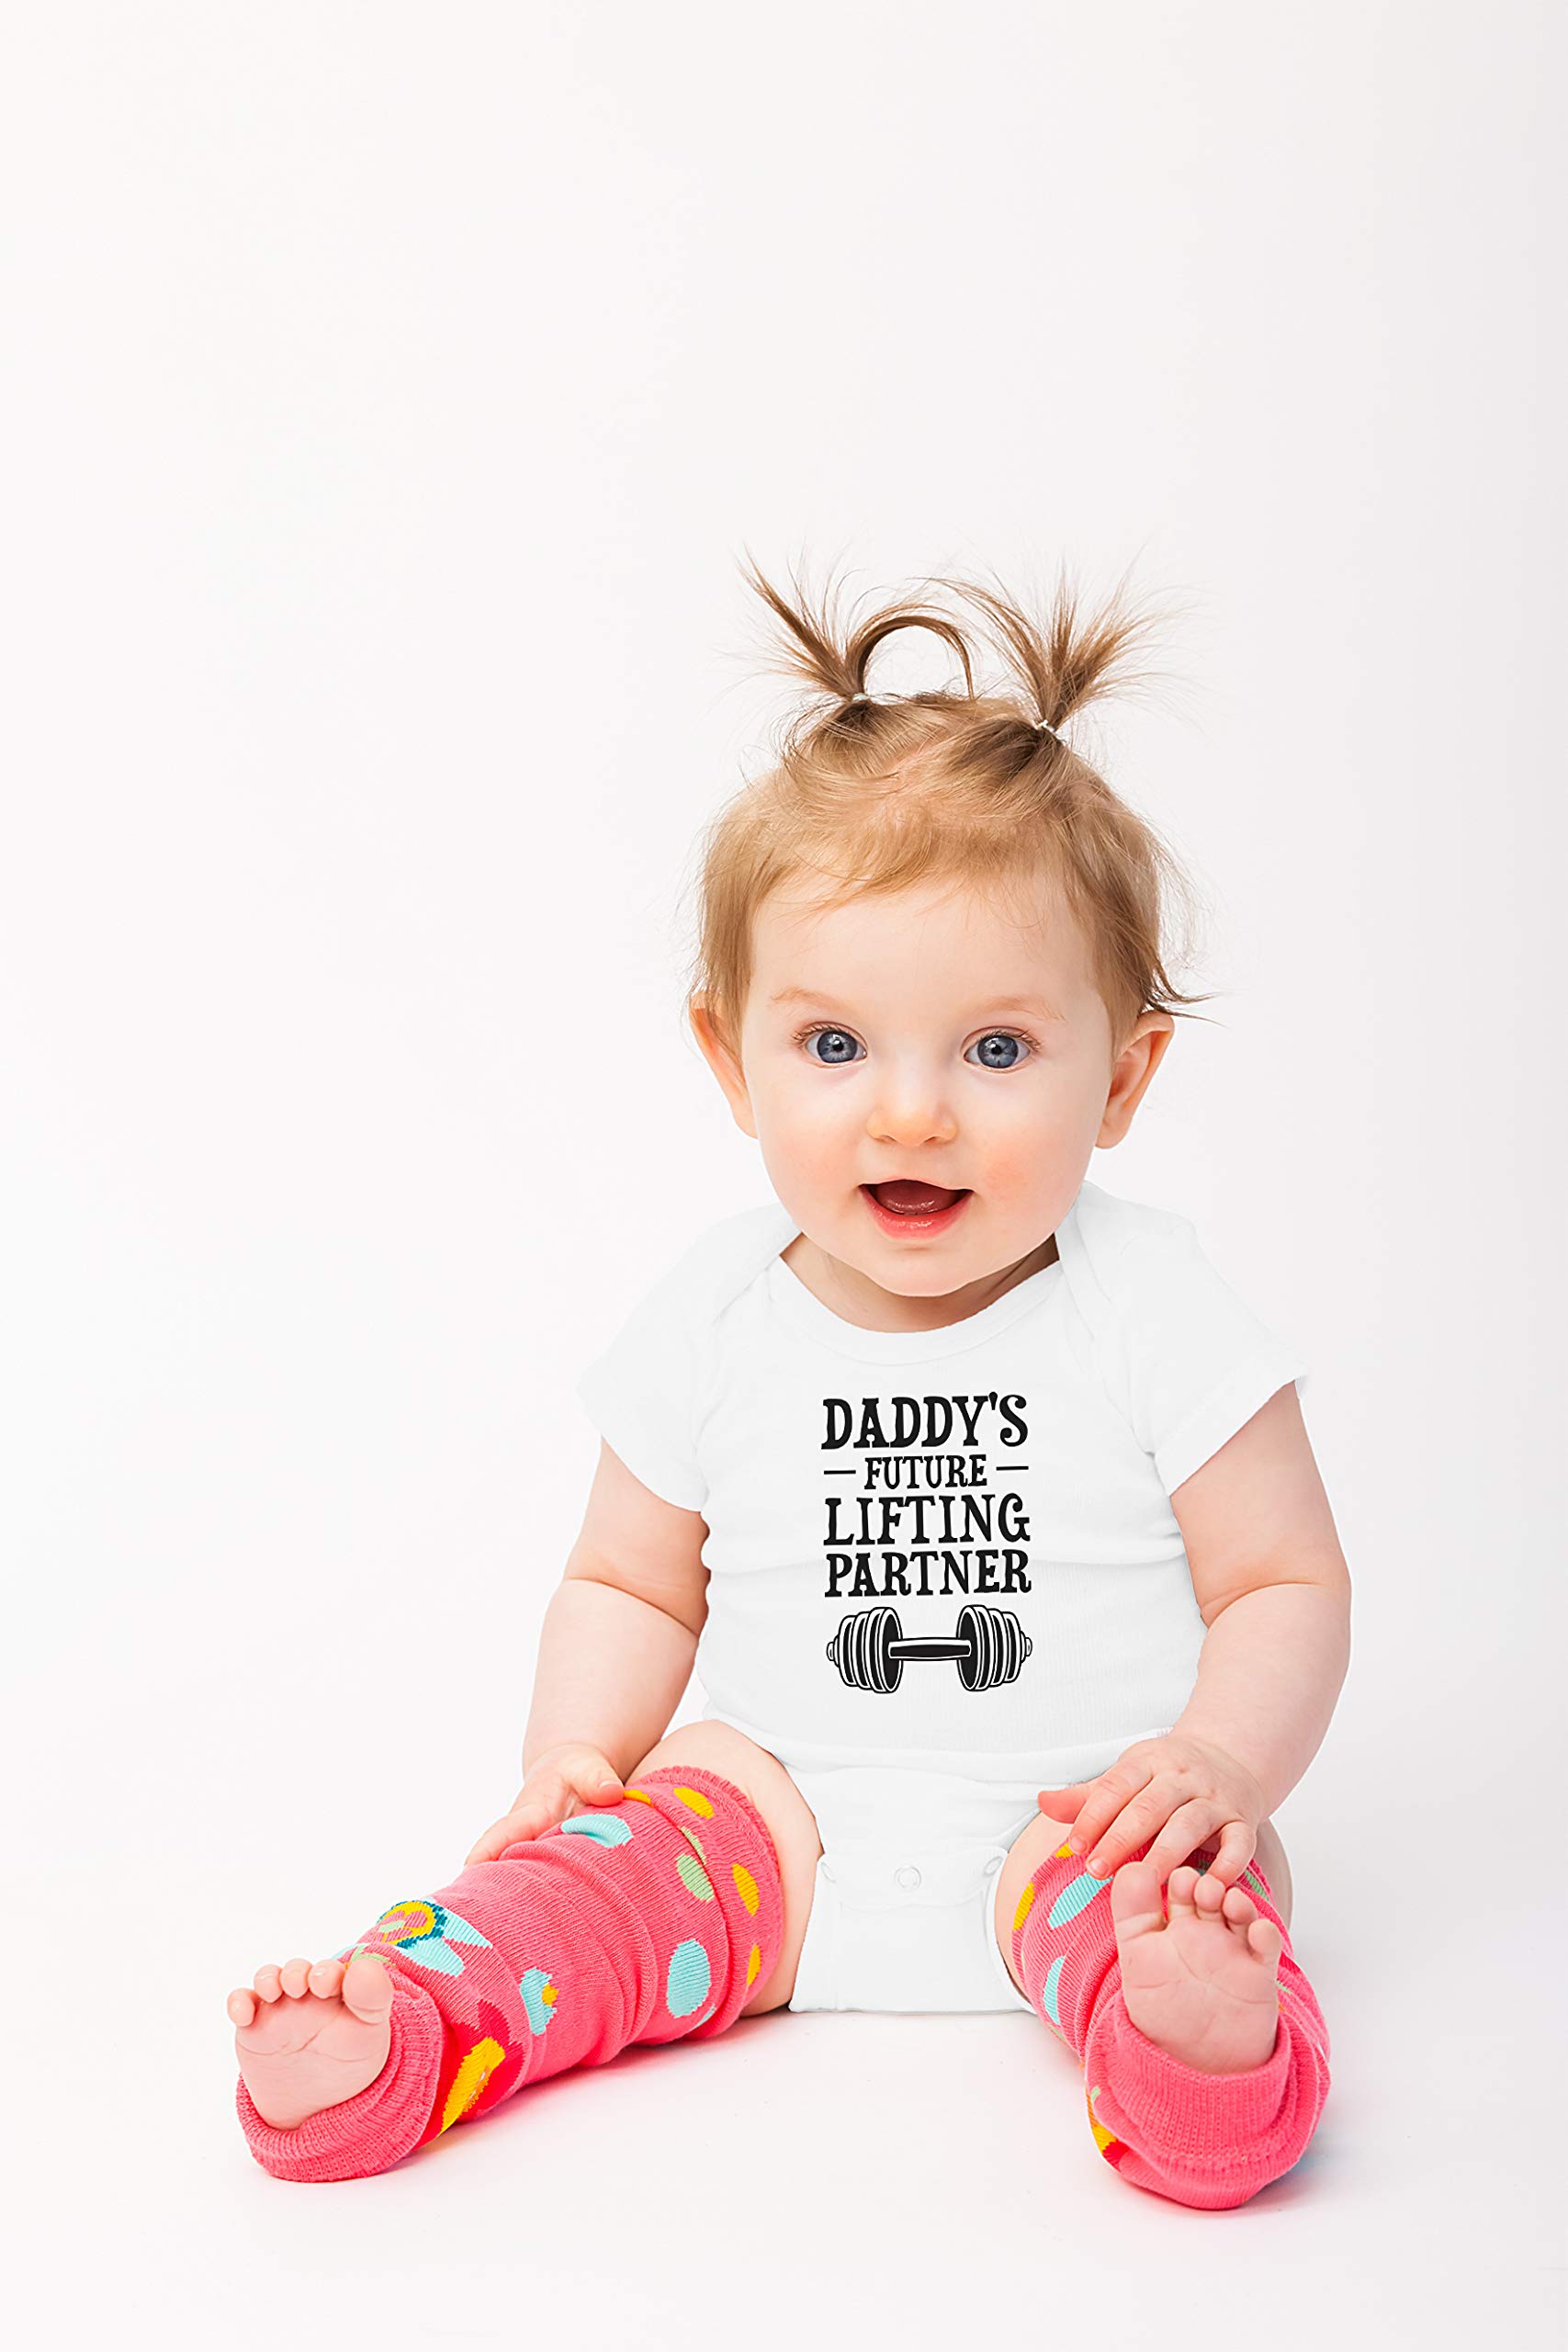 Daddy's Future Lifting Partner - Funny Cute Infant Creeper, One-Piece Baby Bodysuit